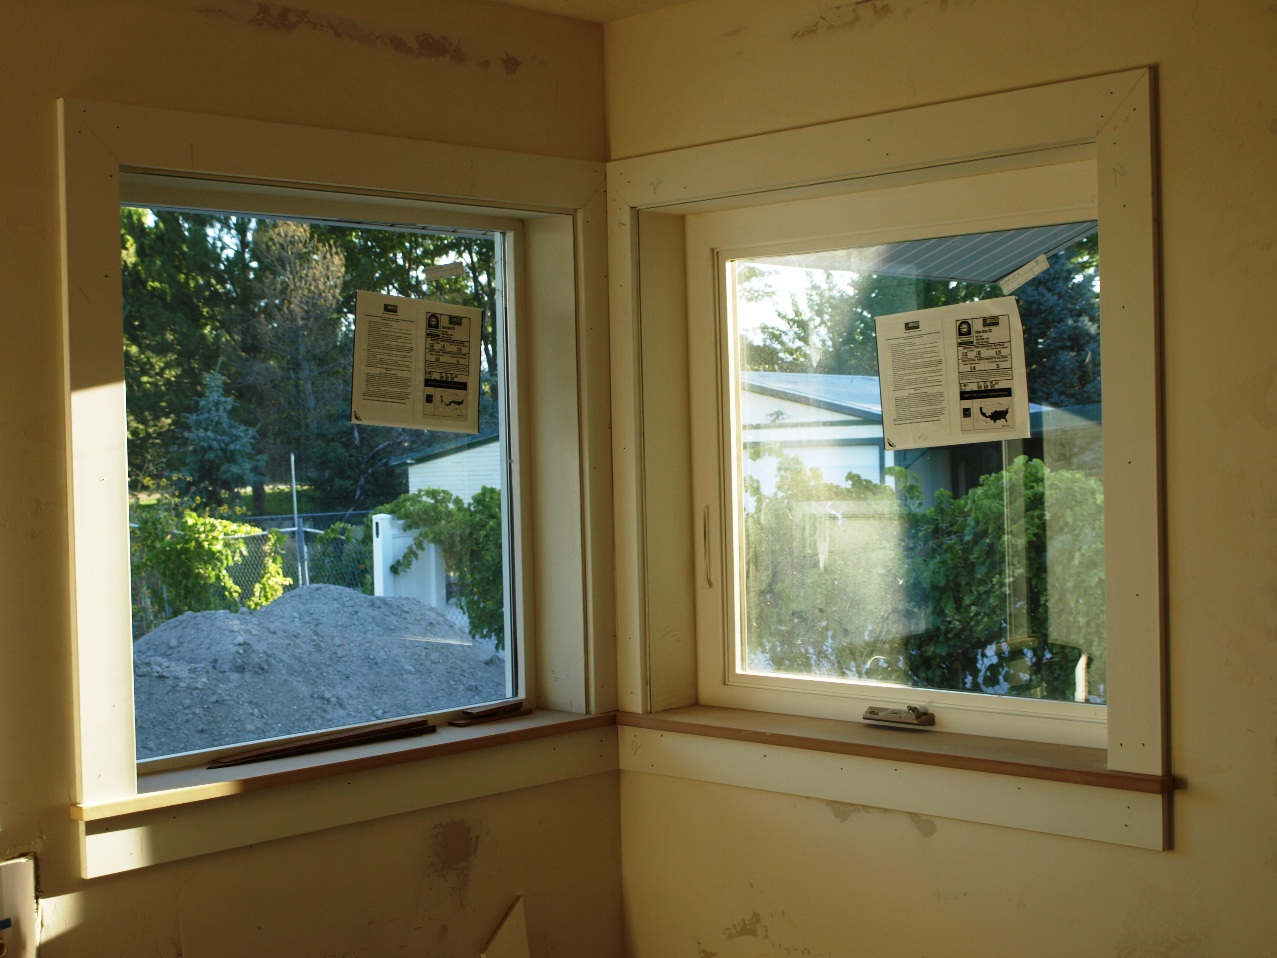 laundry room windows. . . so my wife can look out at her garden